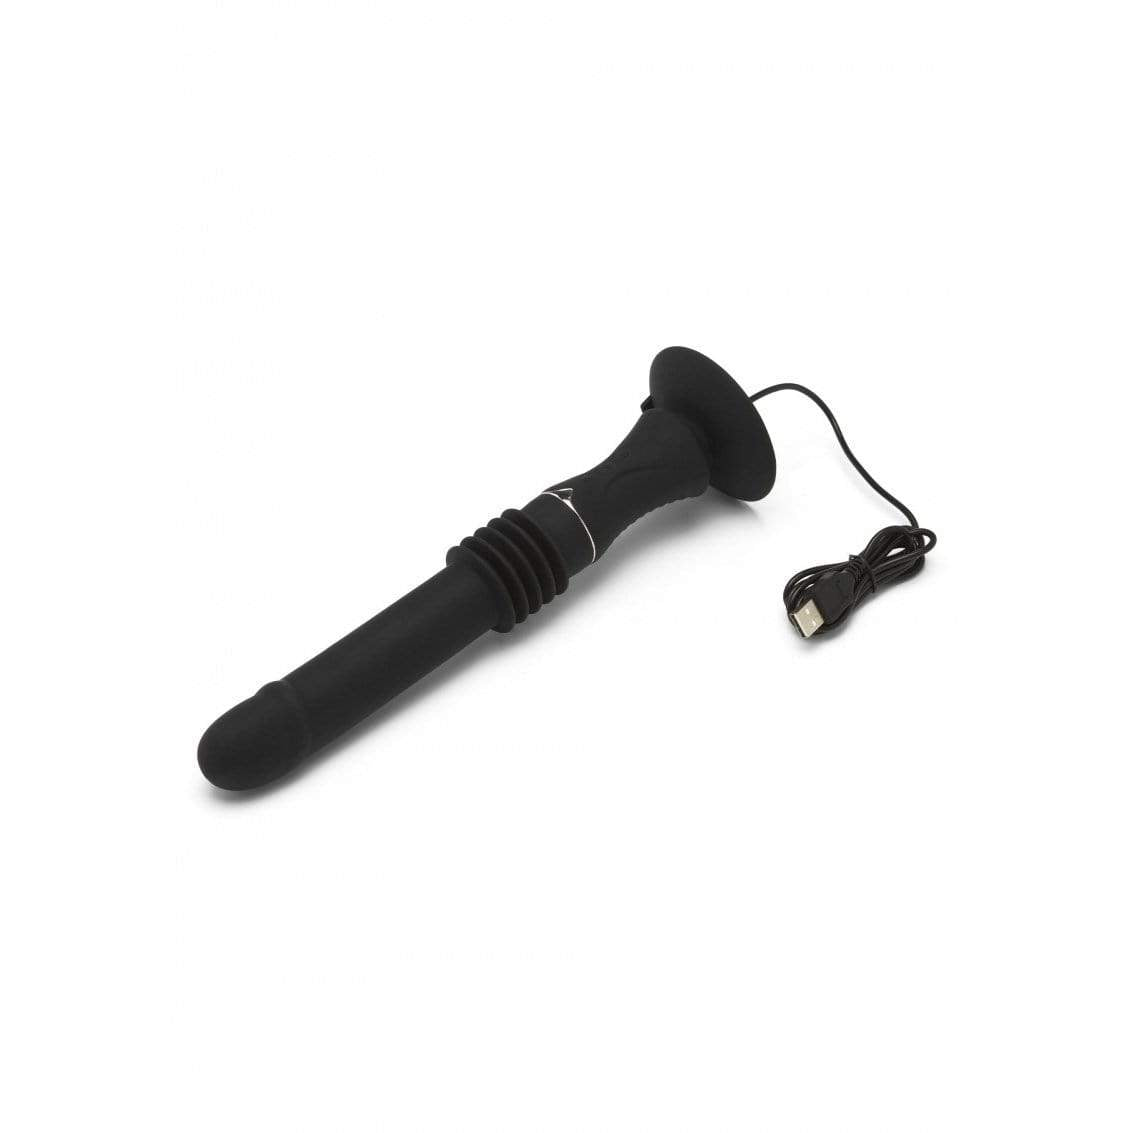 ToyJoy - Sexentials Majestic Thrusting Vibe Vibrator (Black) Non Realistic Dildo w/o suction cup (Vibration) Rechargeable 319991050 CherryAffairs